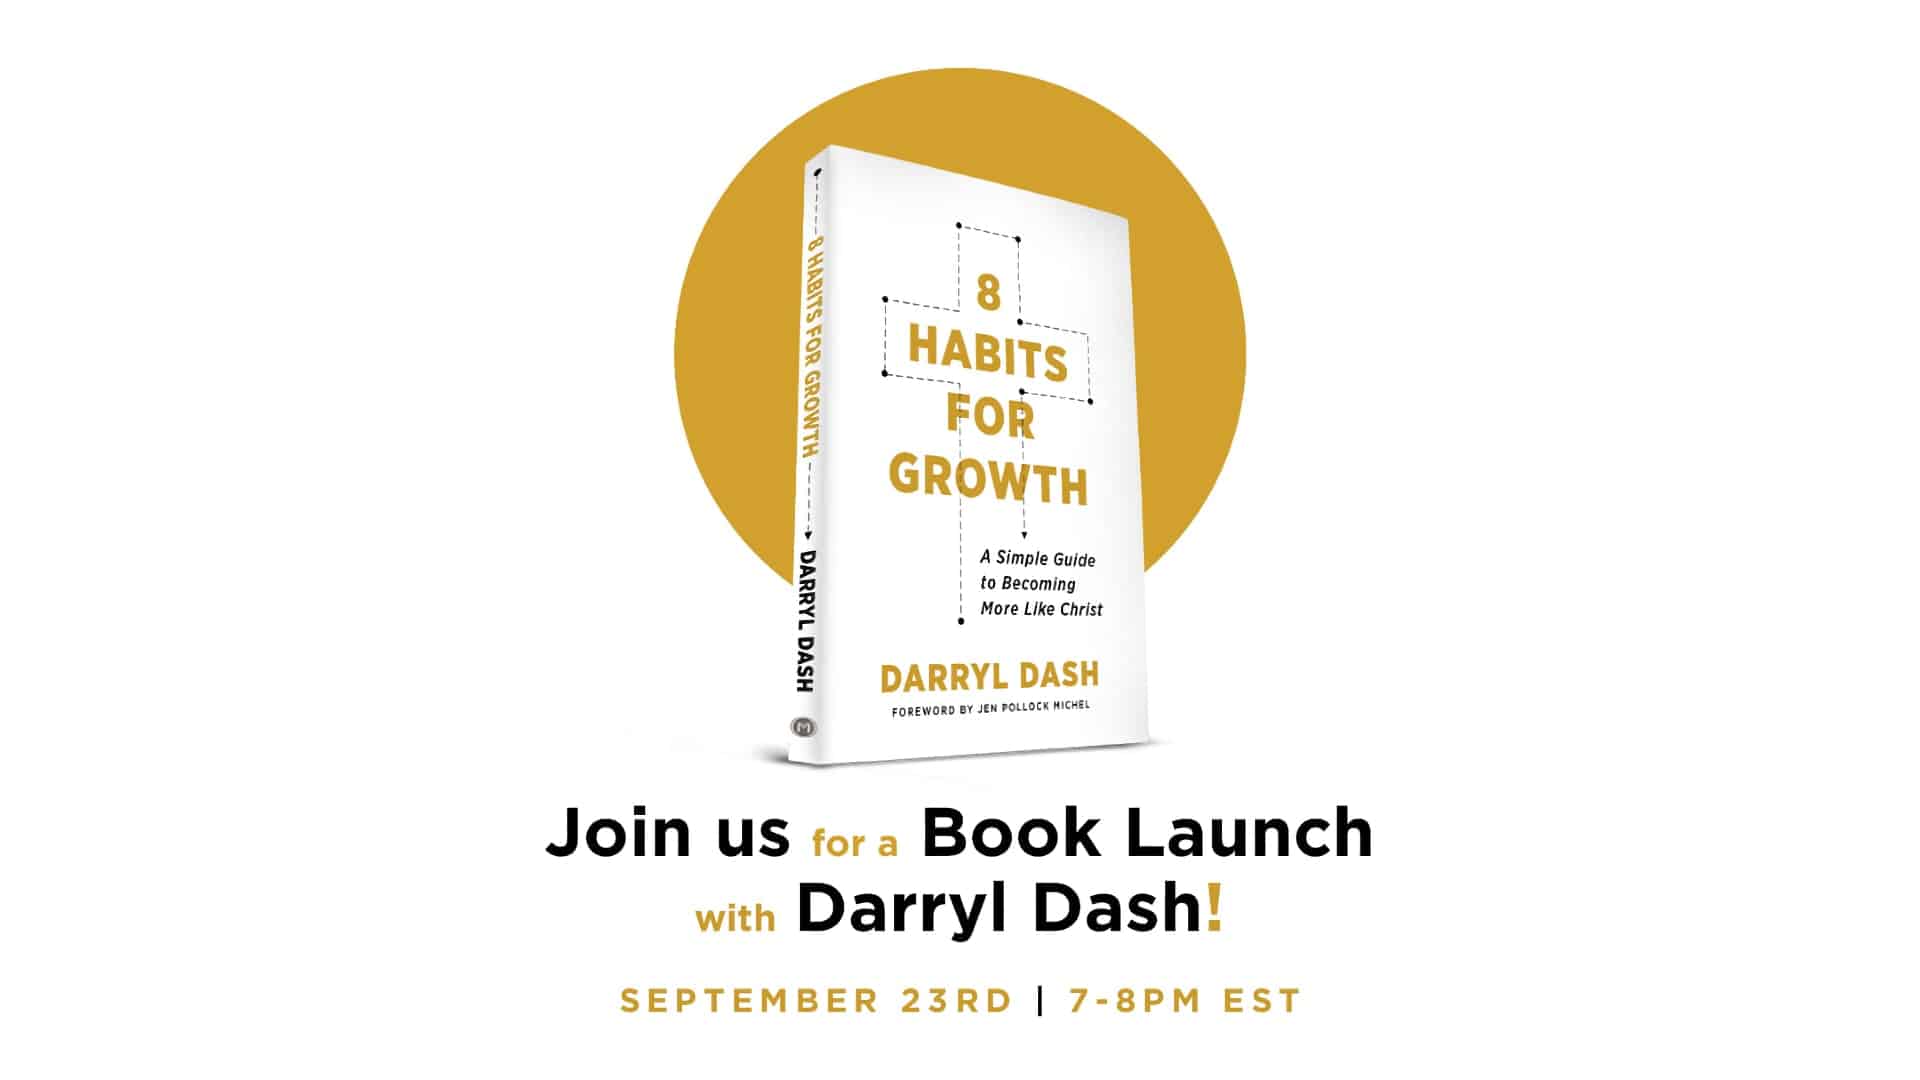 8 Habits for Growth Launch Party